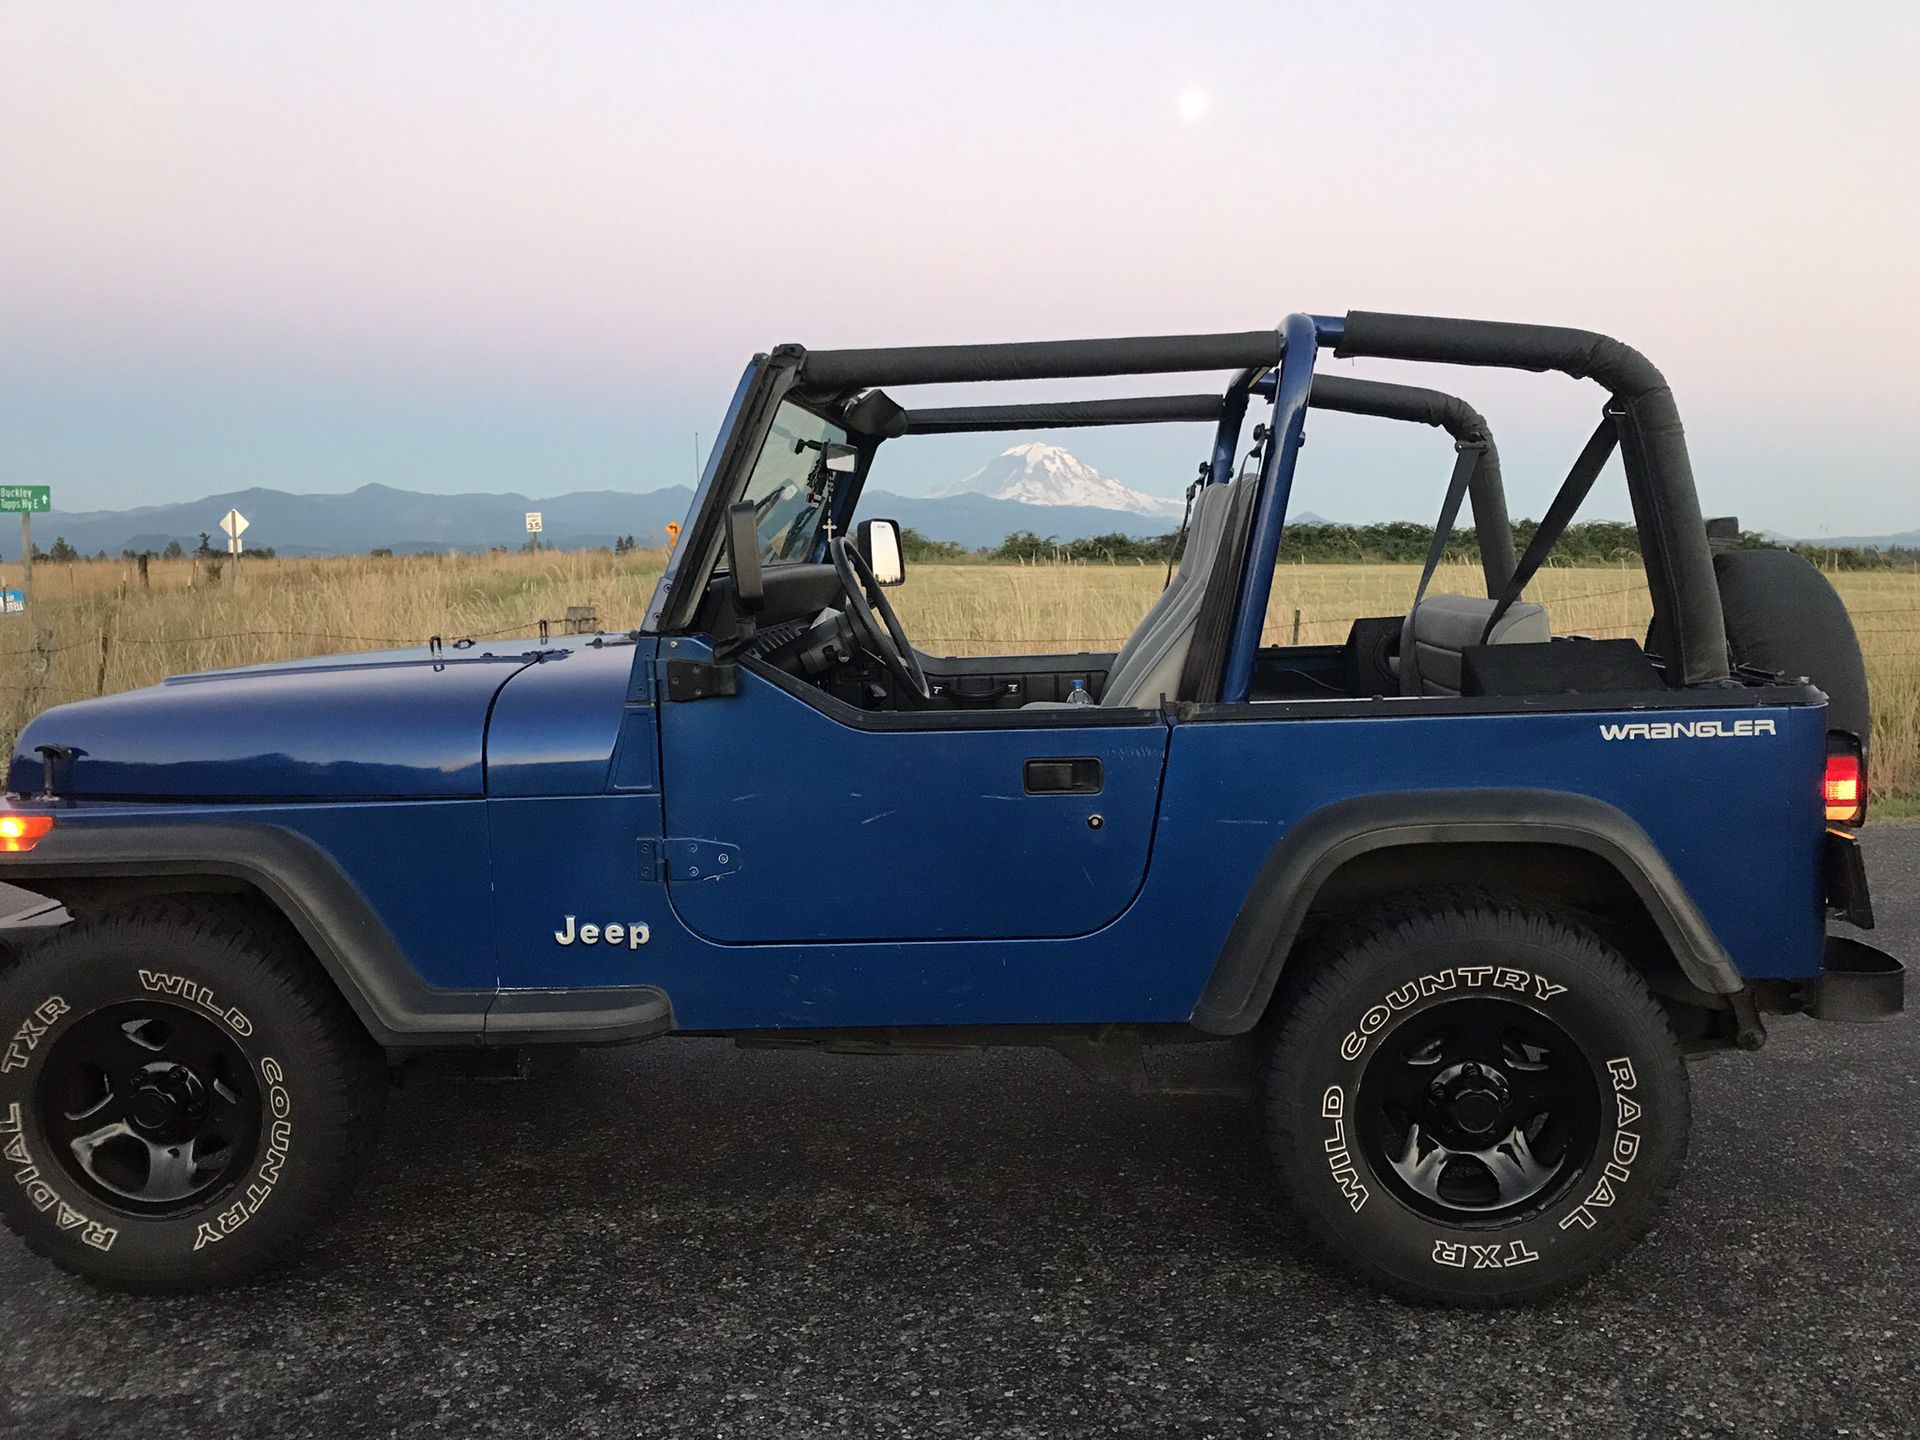 1995 Jeep Wrangler for Sale in Lake Tapps, WA - OfferUp